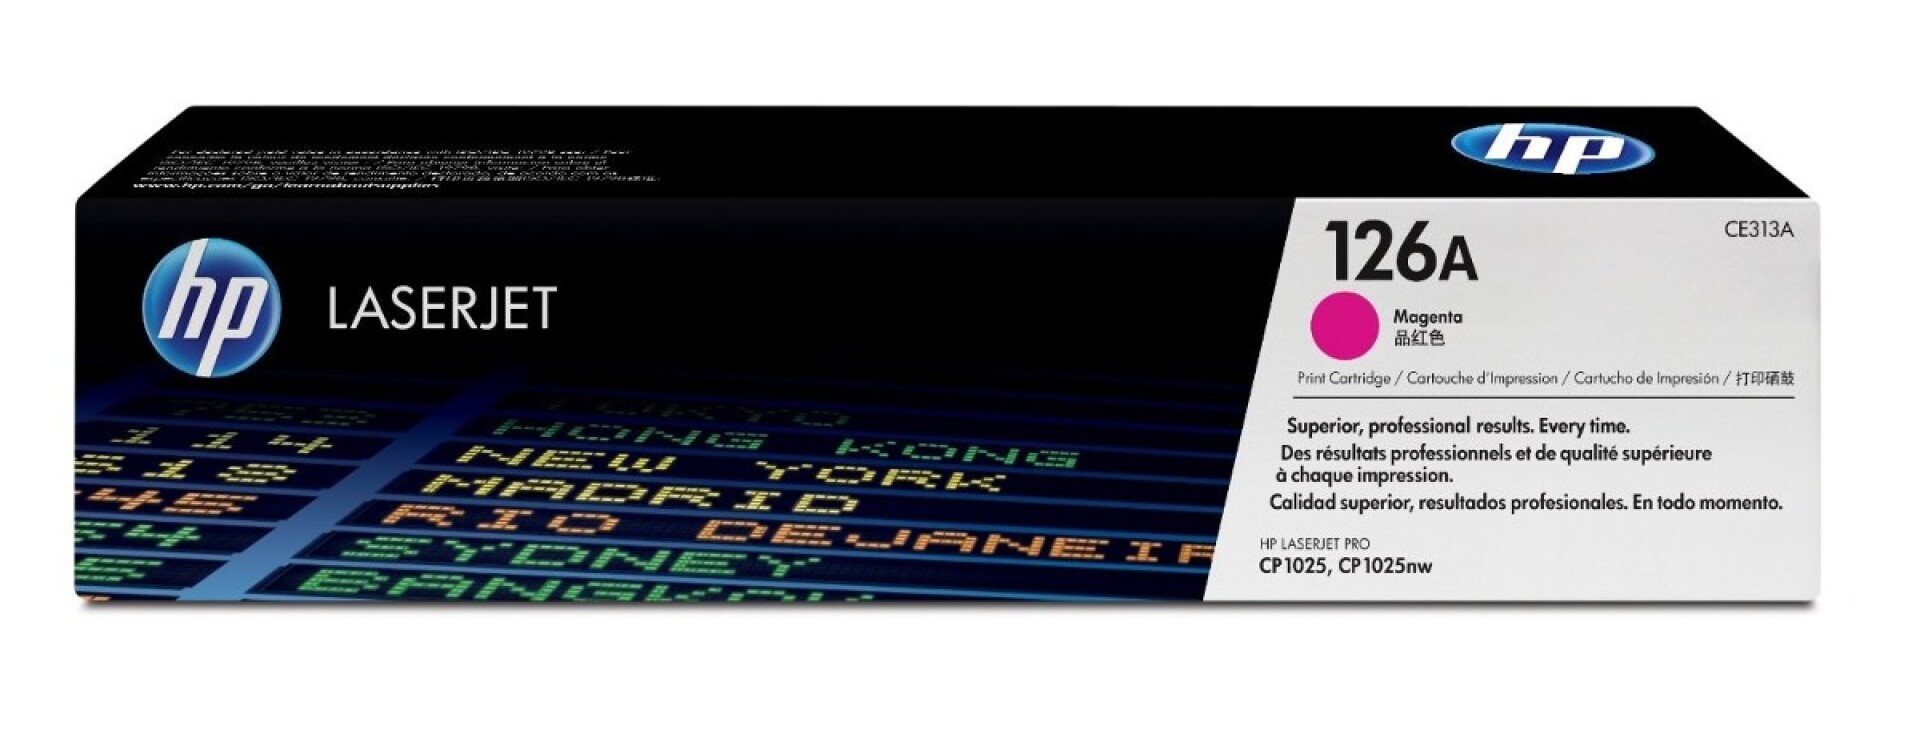 HP TONER CE313A MAGENTA 126A CP1000/1025NW/M175N 1000CPS - 2480 